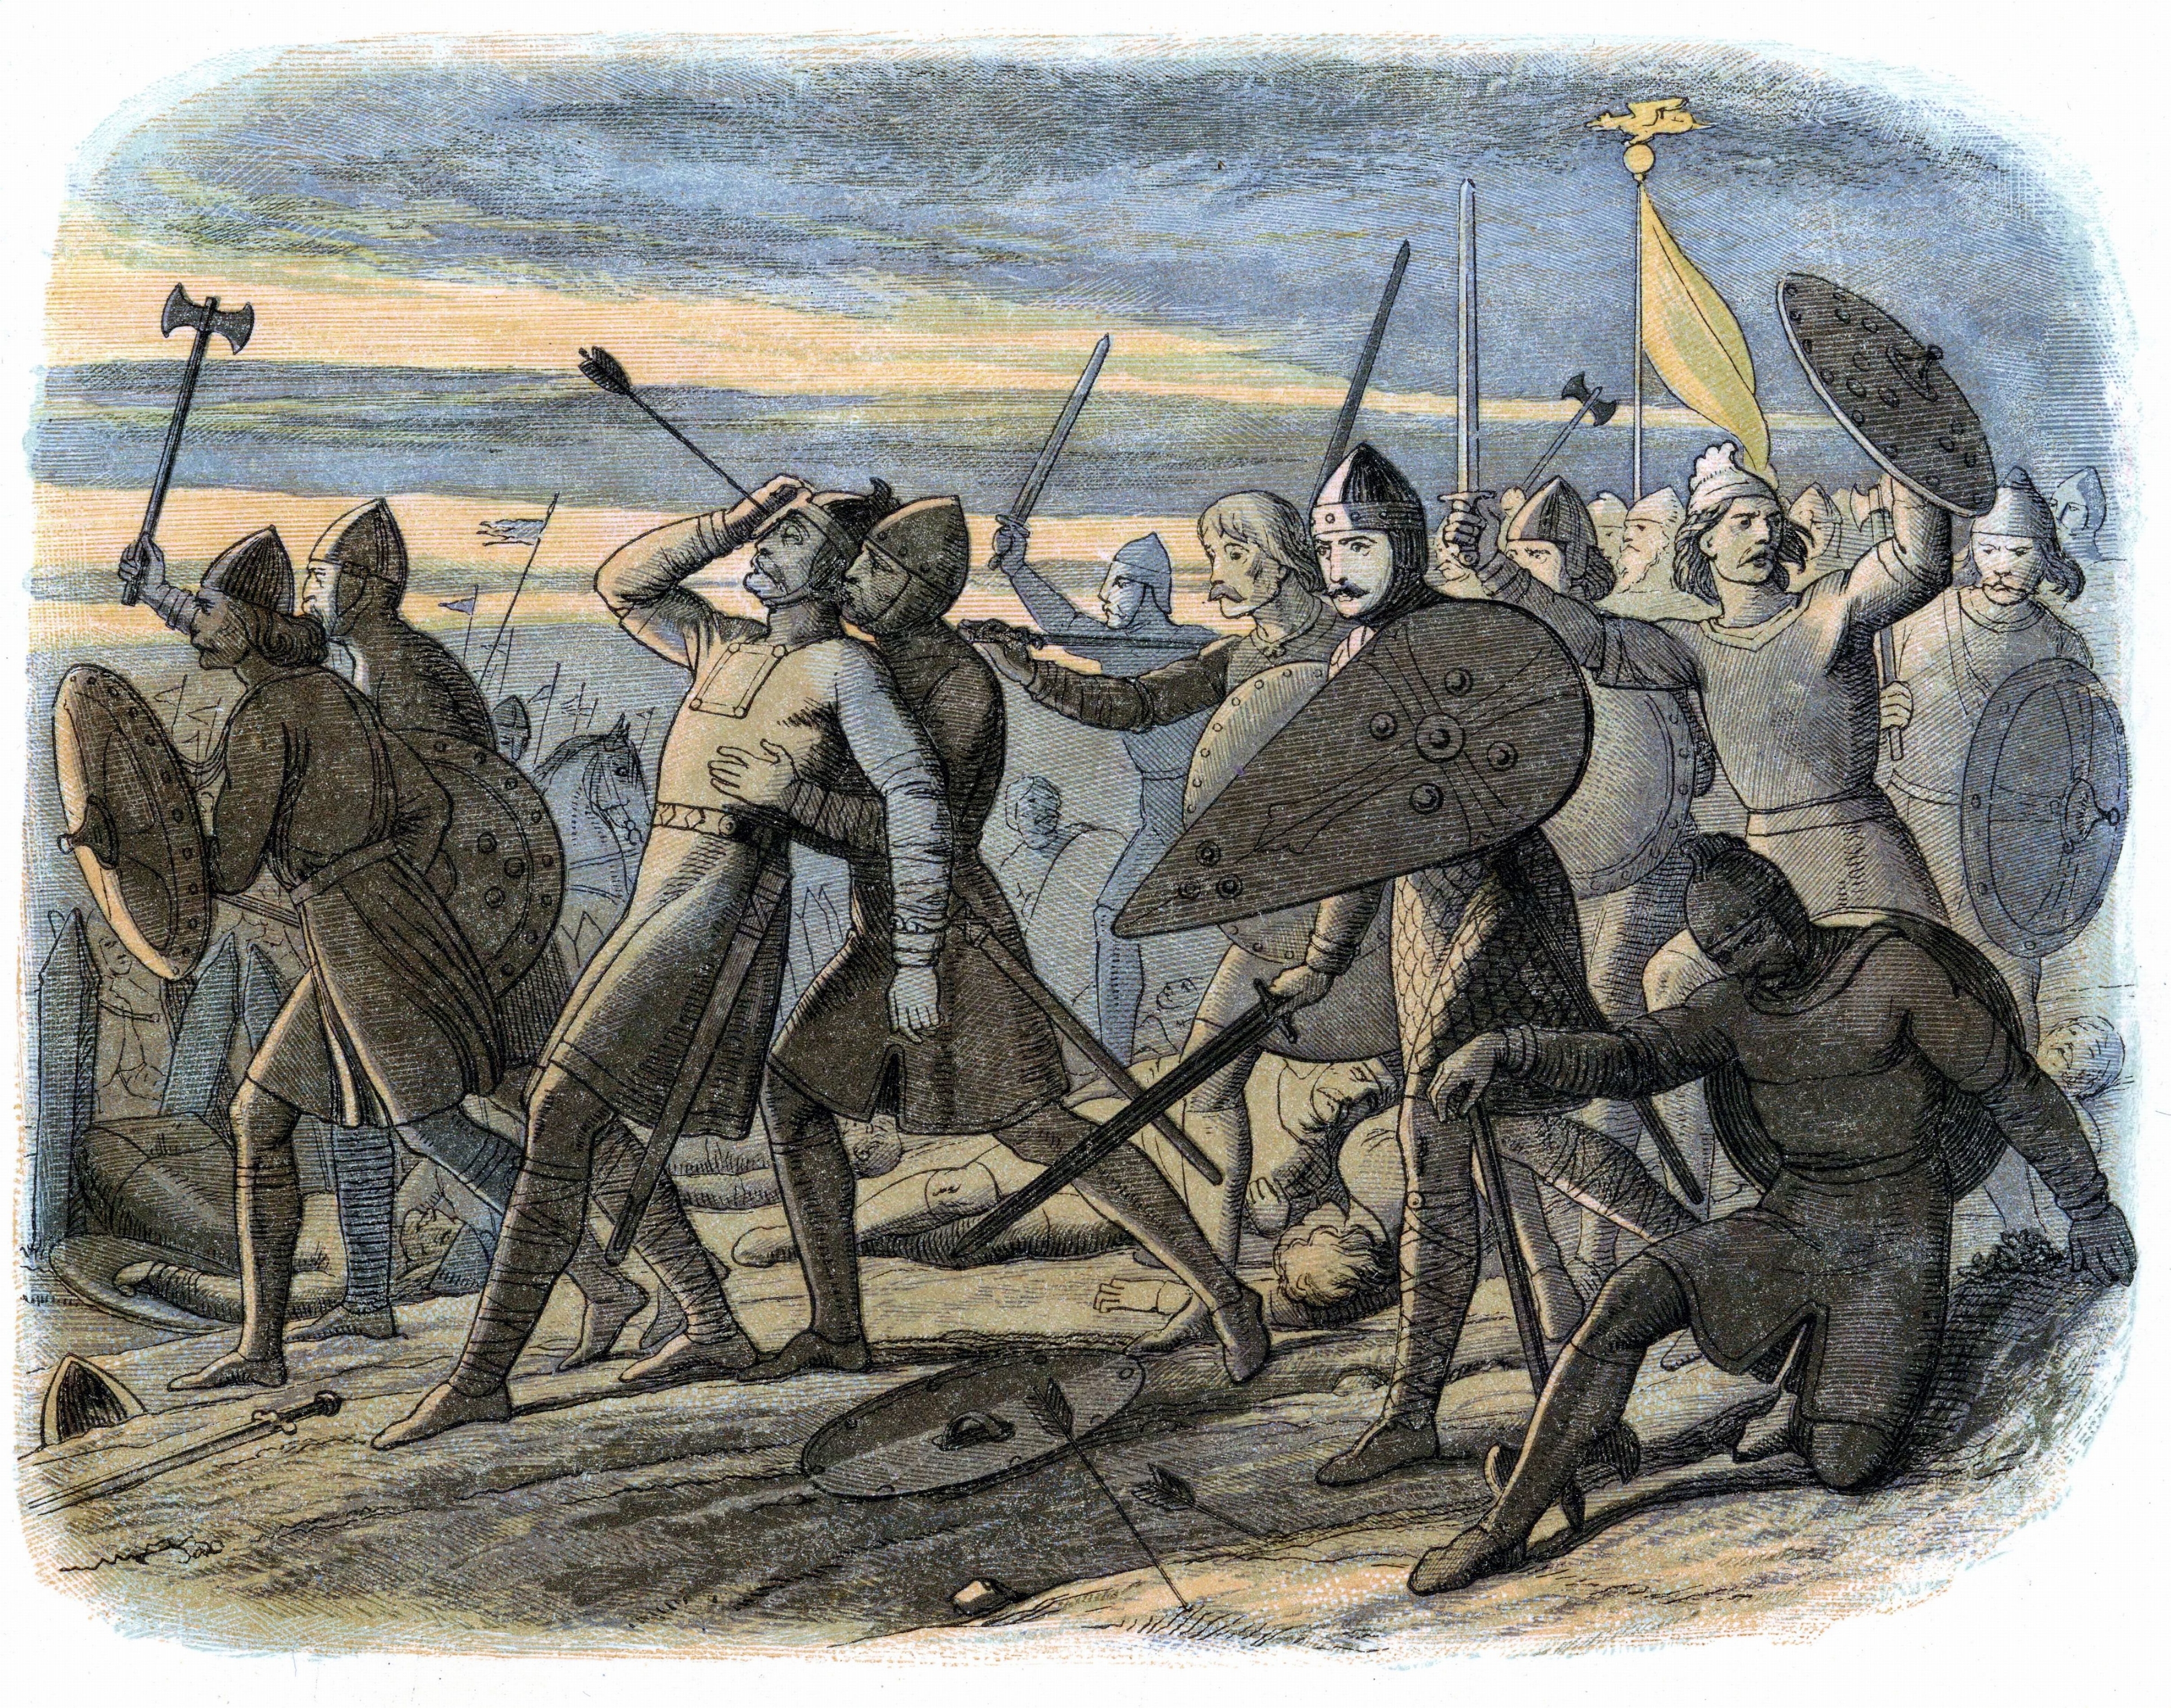 An illustration of Harold the second with an arrow through his eye and war going on around him